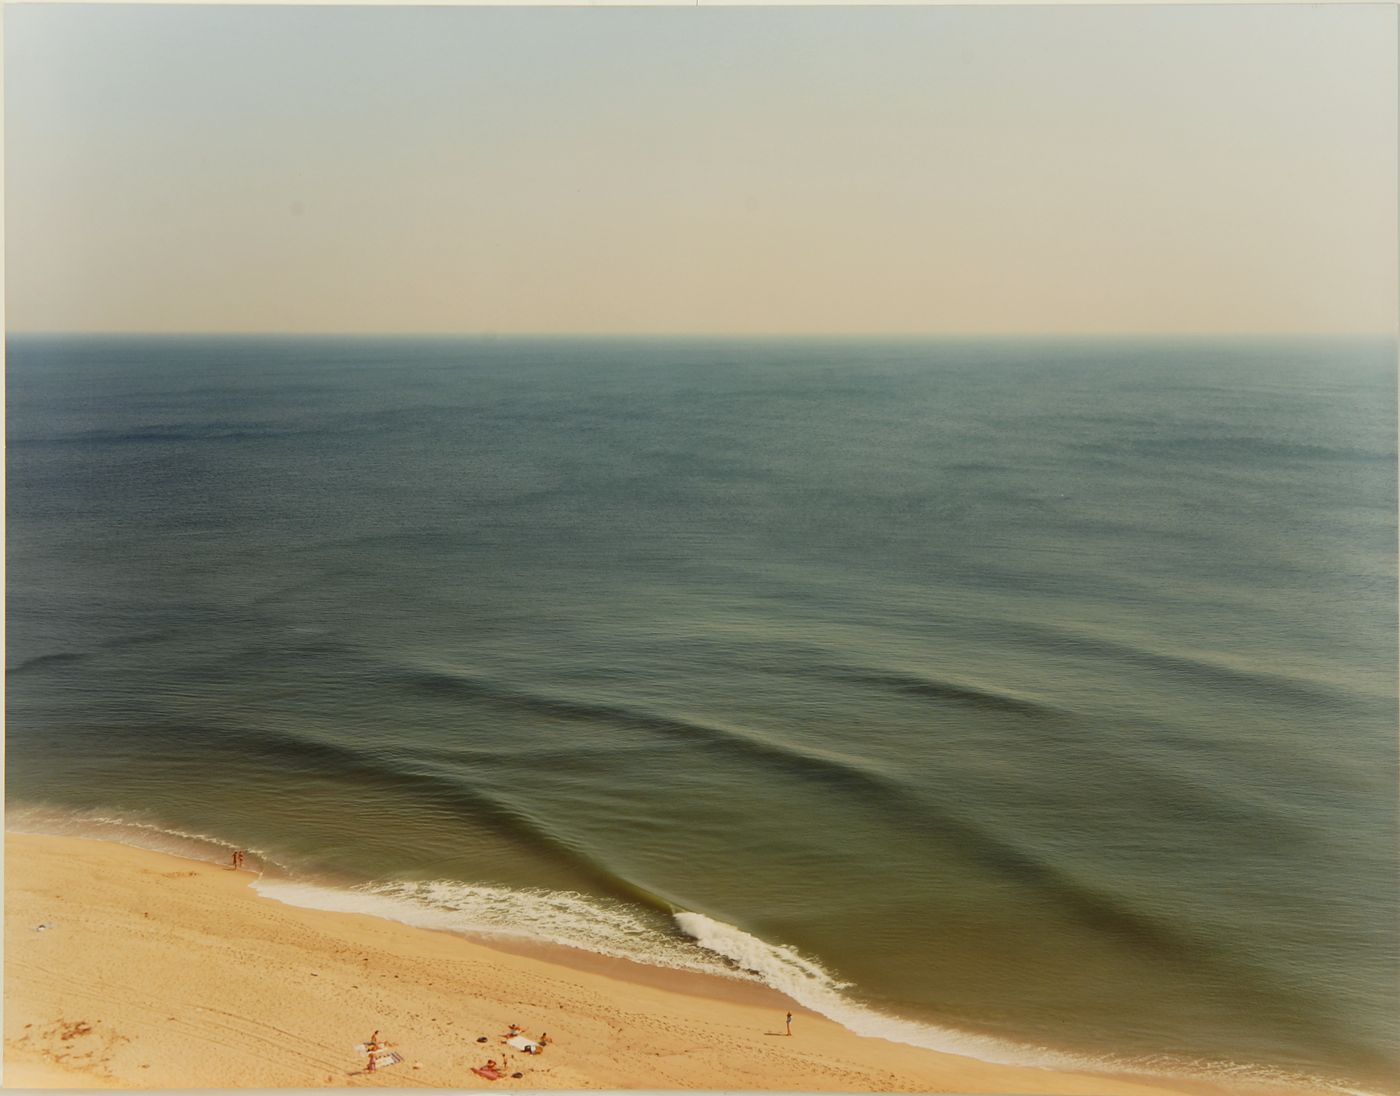 AMERICANSUBURB X: INTERVIEW: "Interview with Joel Meyerowitz – Creating A Sense of Place" (1990)